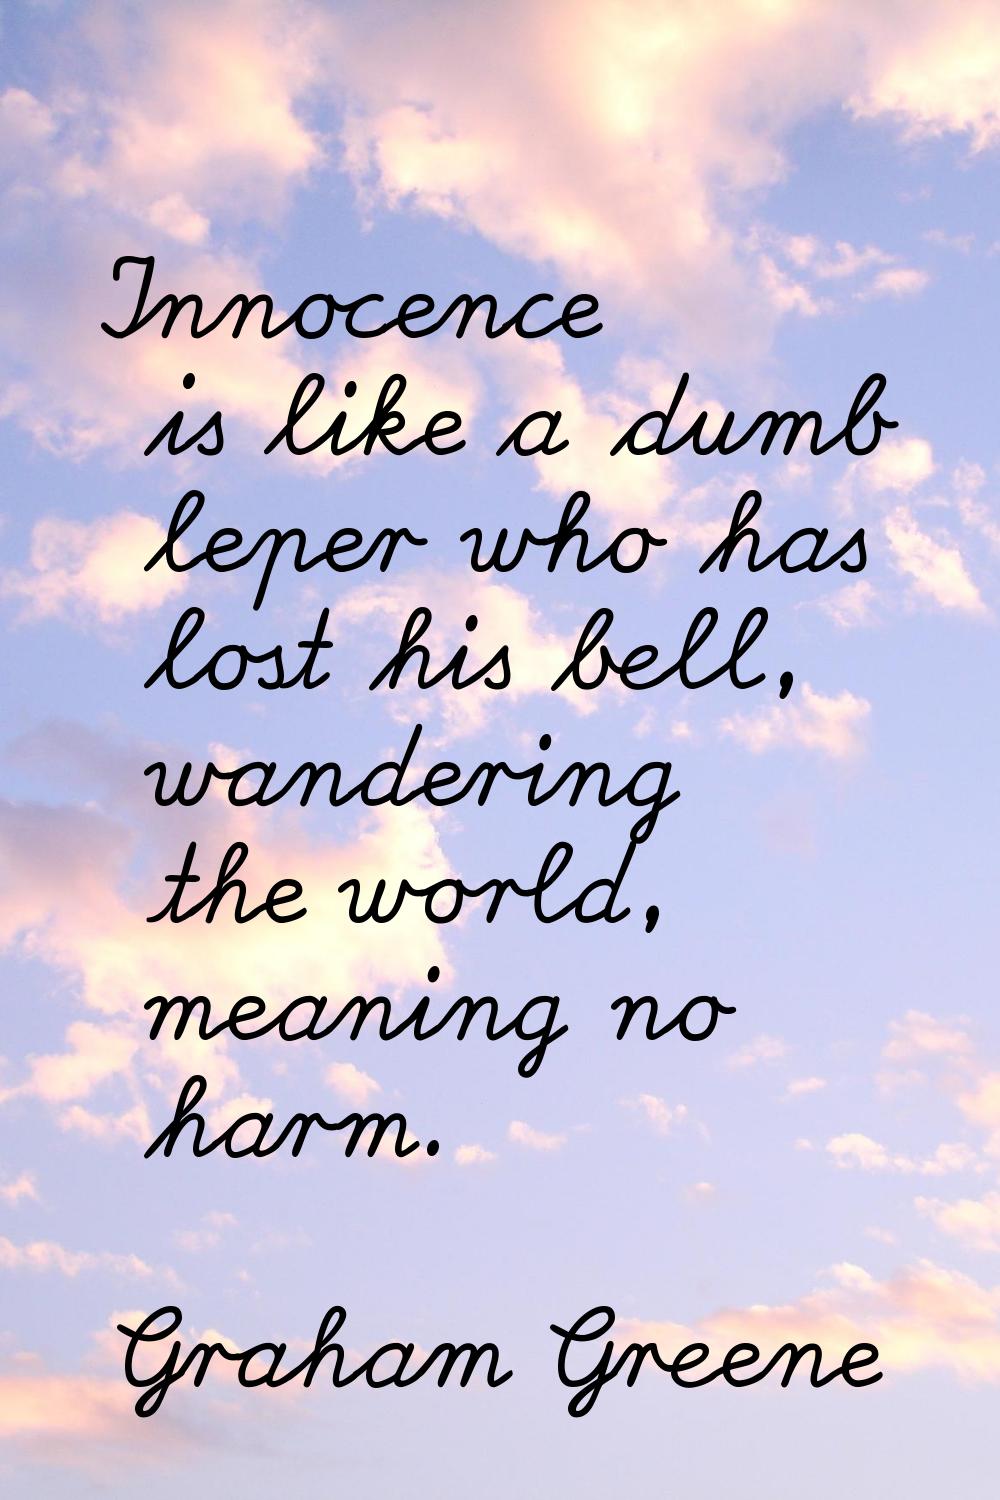 Innocence is like a dumb leper who has lost his bell, wandering the world, meaning no harm.